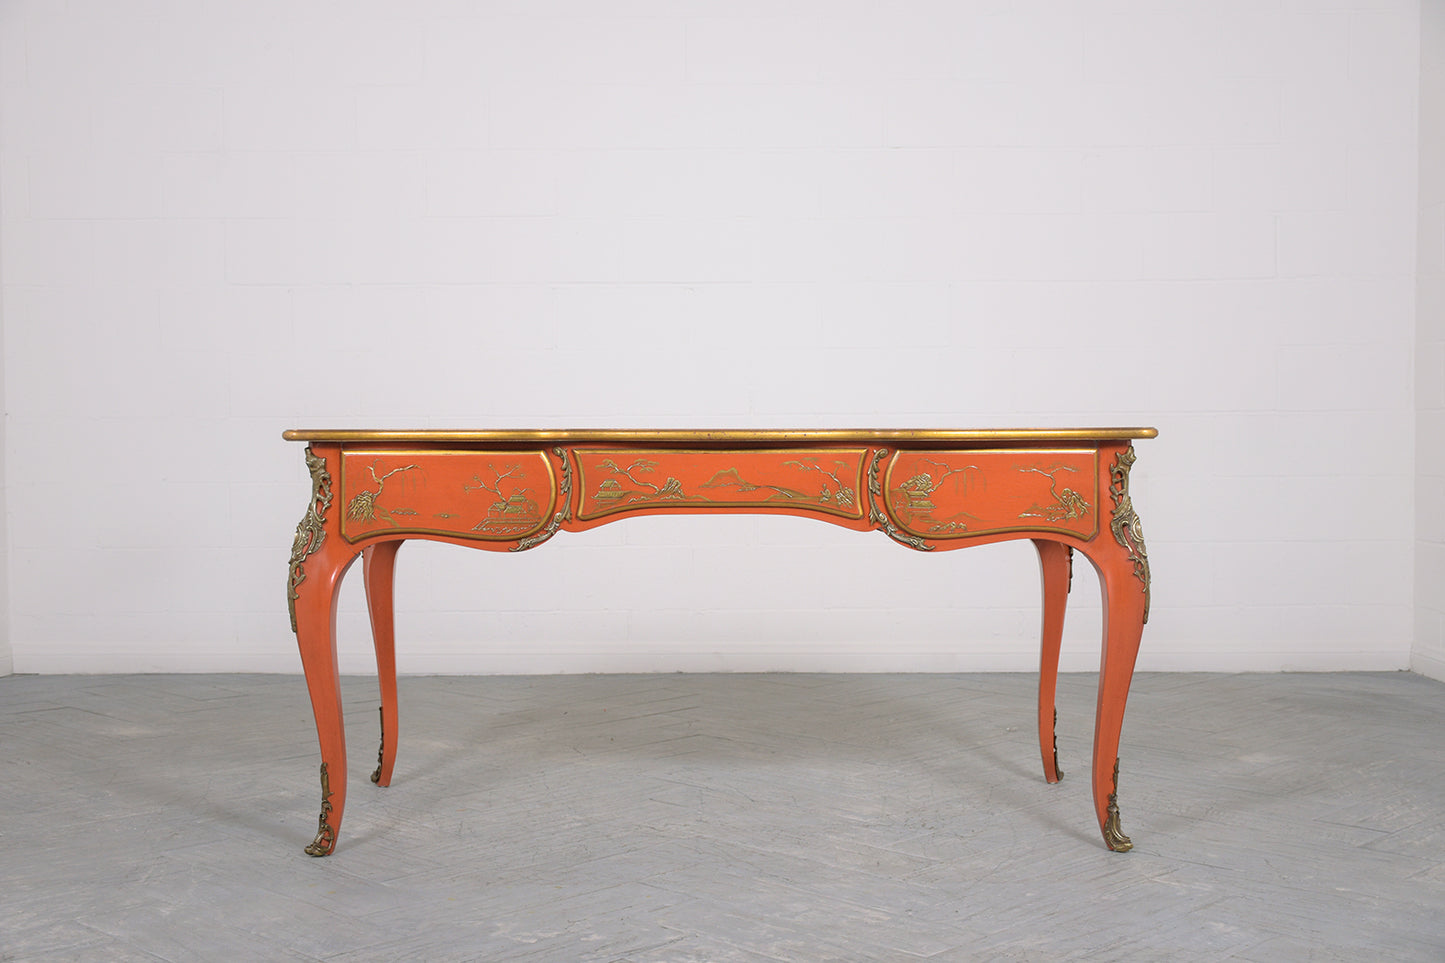 Vintage French Chinoiserie Style Desk